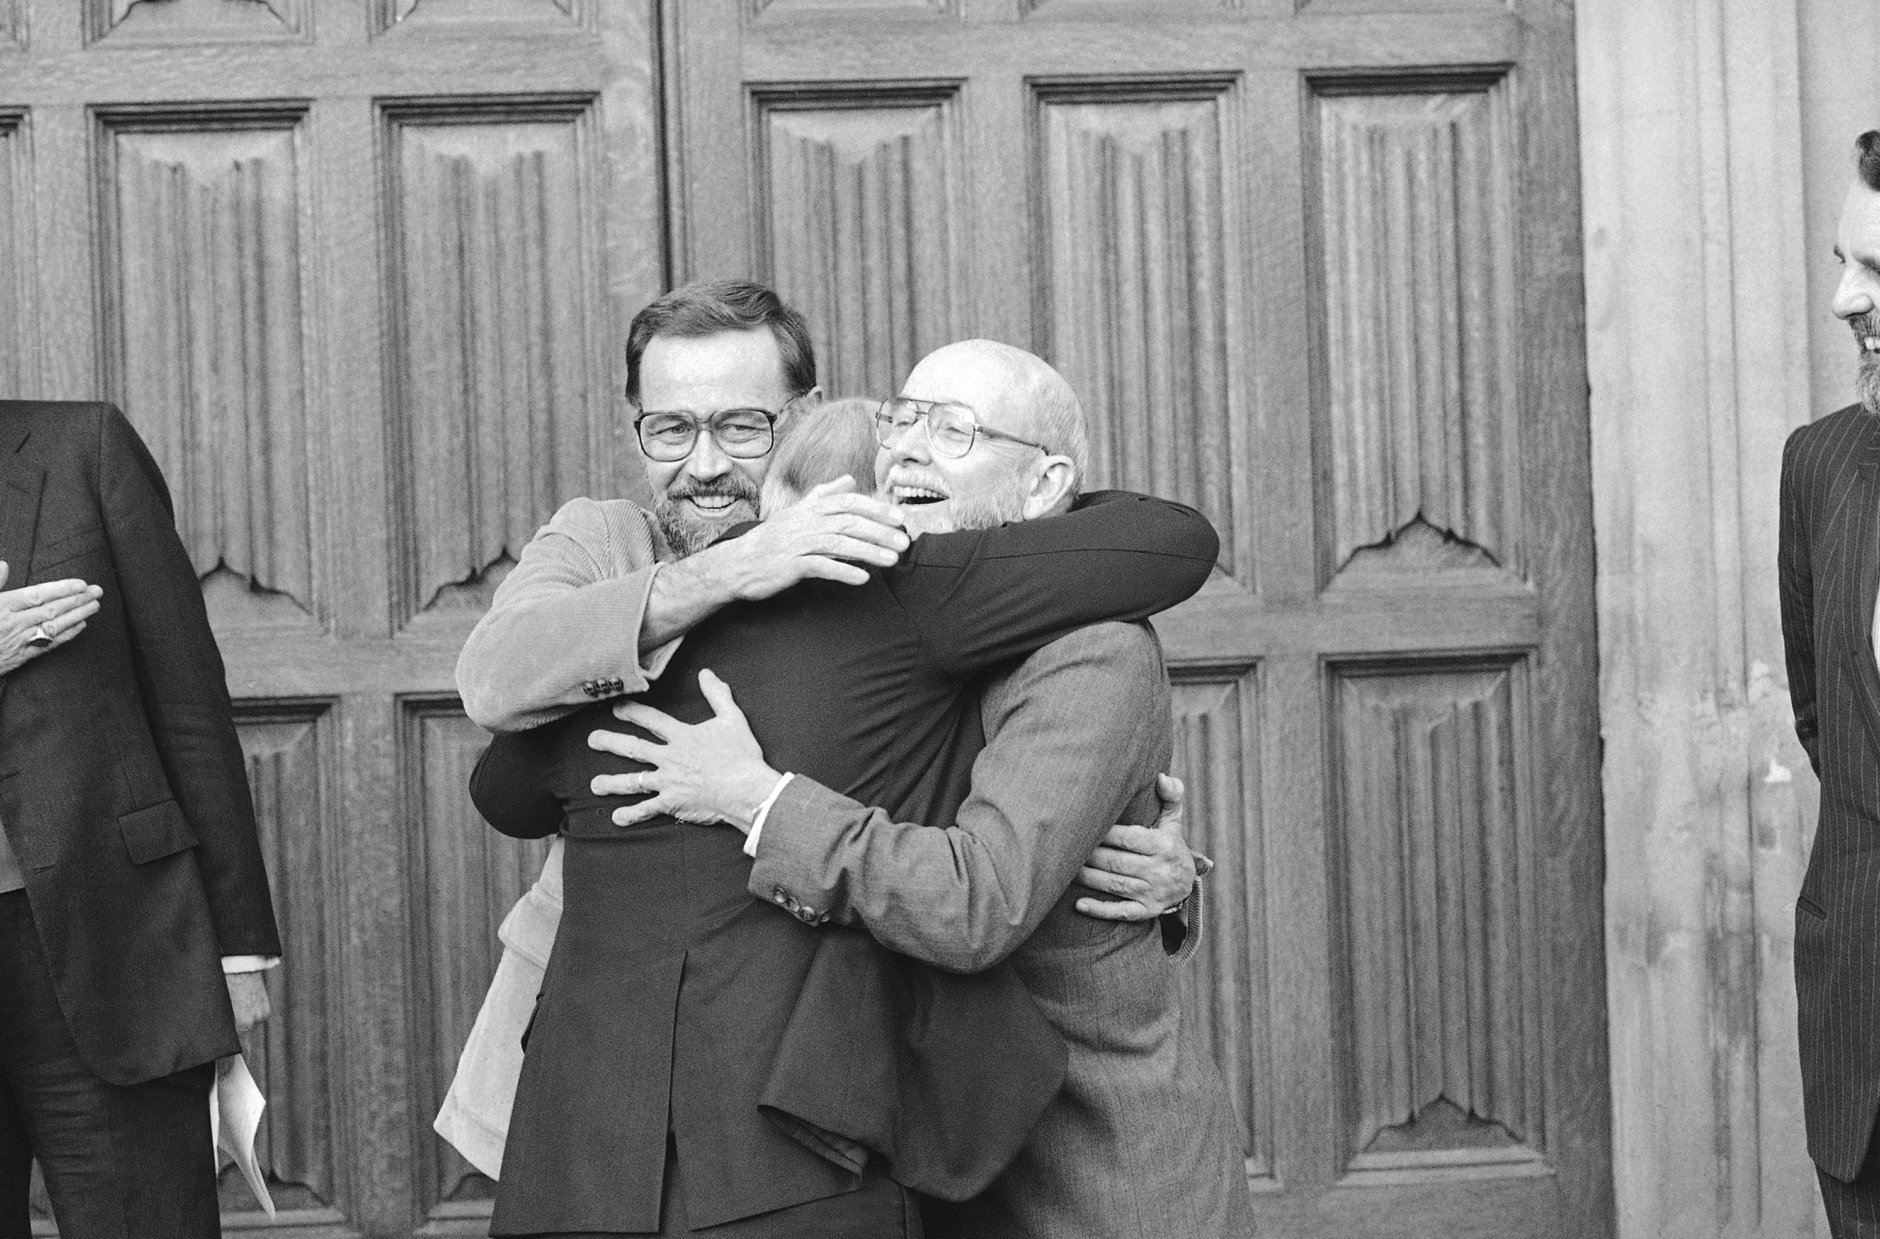 Three Americans formerly held as hostages in Lebanon embrace on being reunited in London, Nov. 17, 1986. The trio, from left, David Jacobsen, Rev. Lawrence Martin Jenco and Rev. Benjamin Weir, were preparing to meet Church of England envoy Terry Waite. (AP Photo/Gerald Penny)